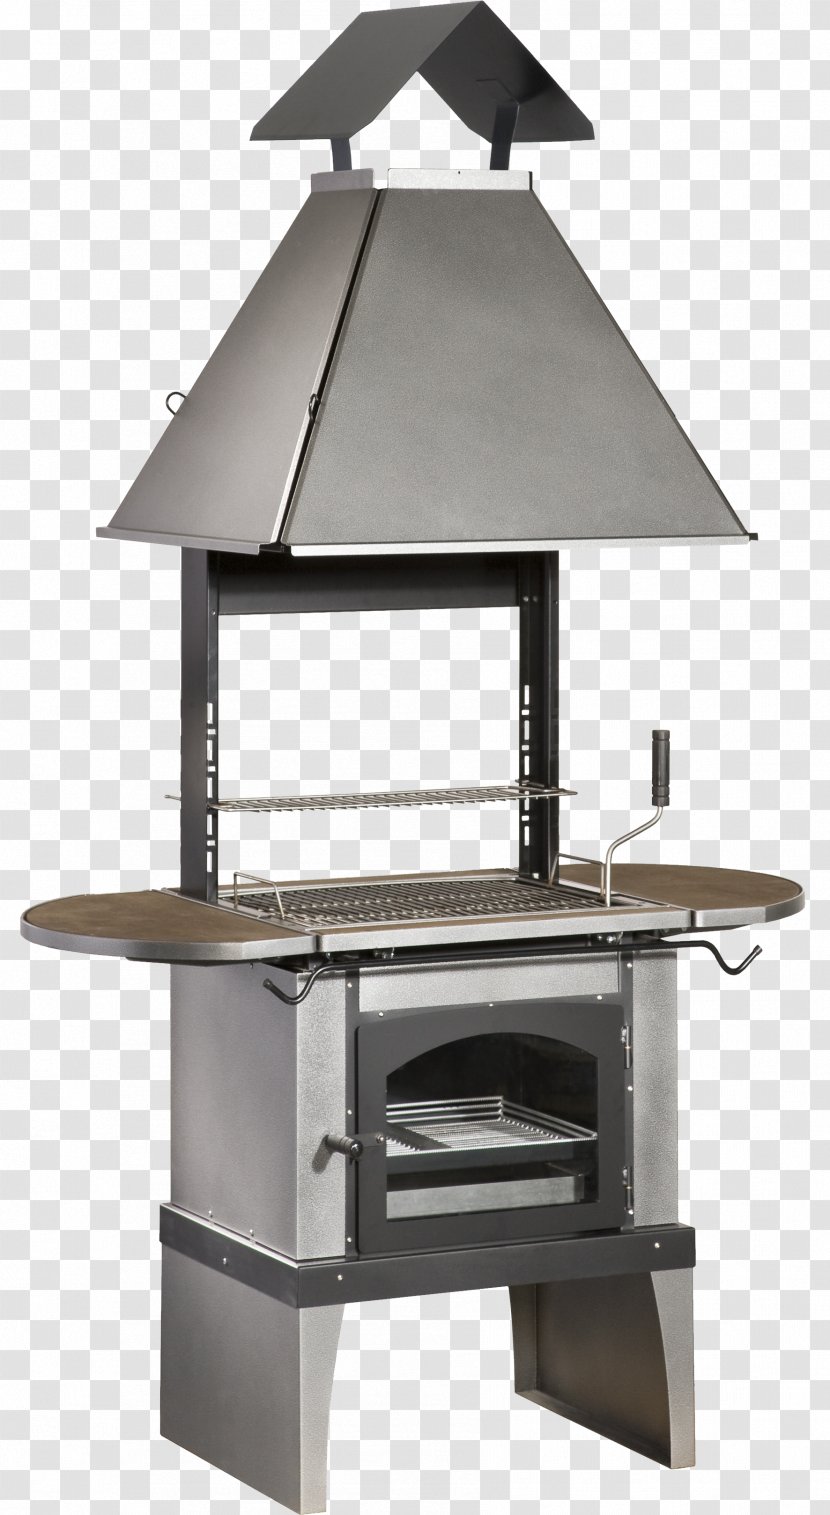 Barbecue Hearth Steel Finland Smoking - Home Appliance Transparent PNG